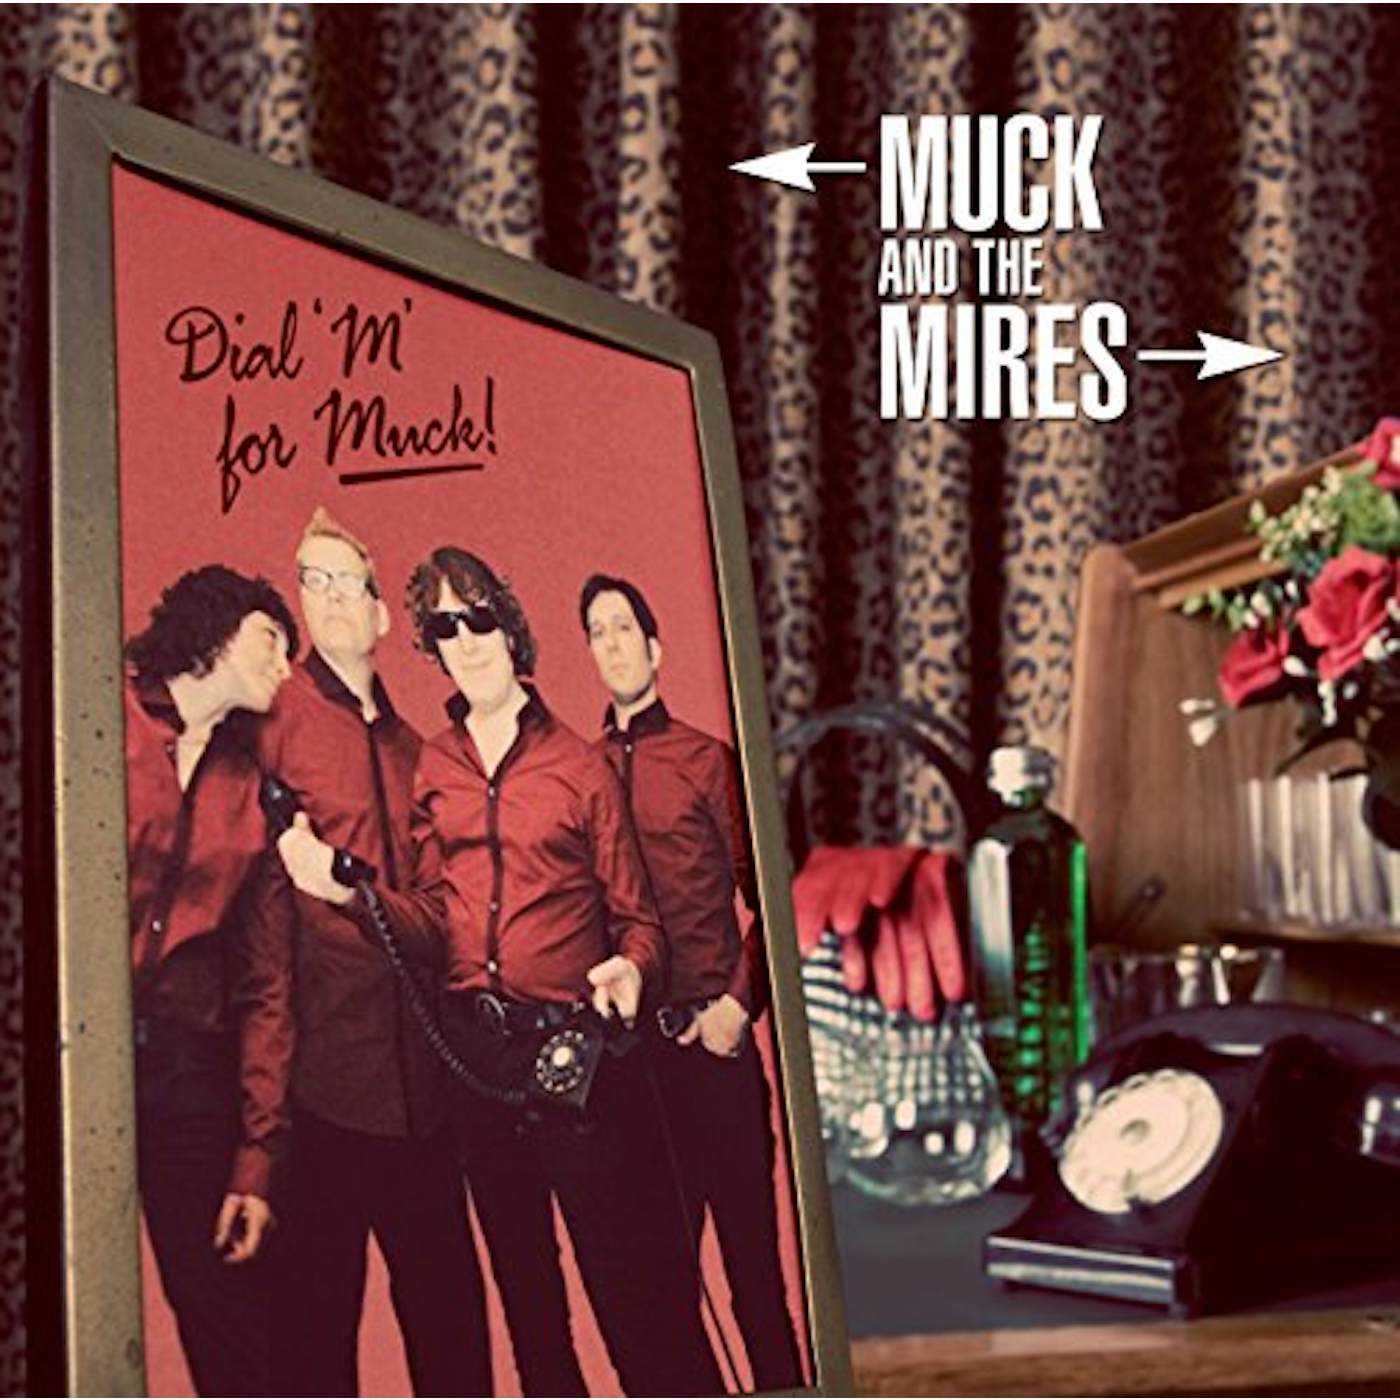 Muck & The Mires DIAL M FOR DUCK CD